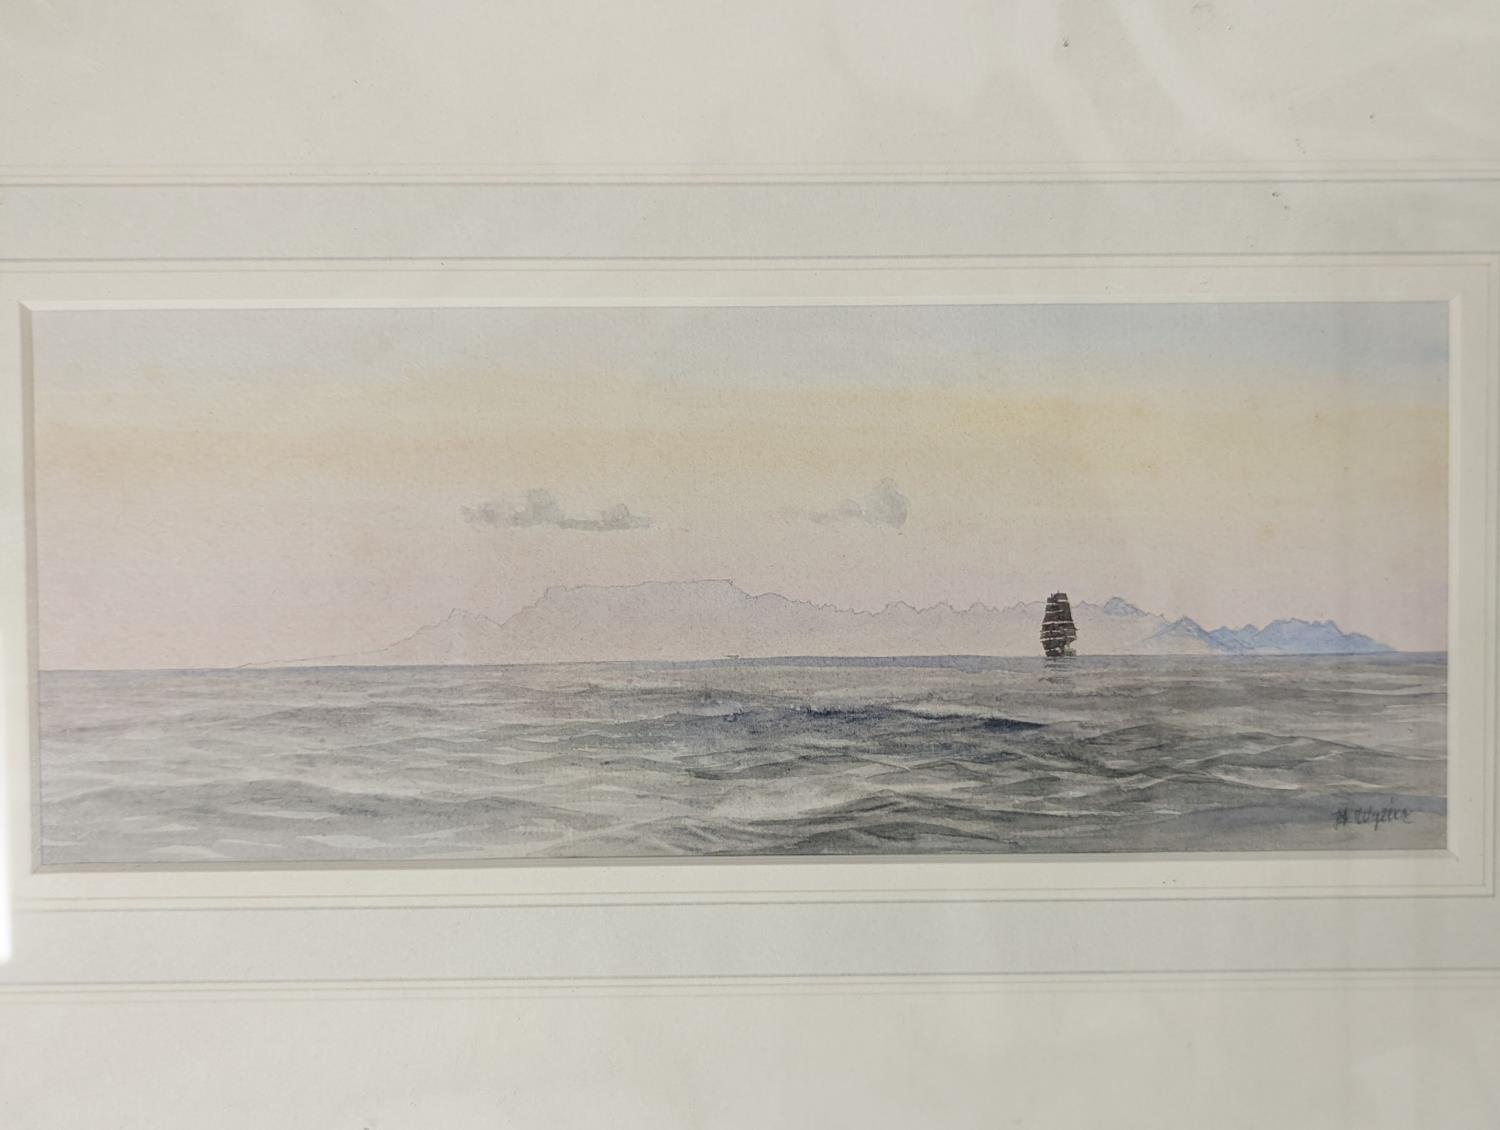 Harold Wyllie (1880-1973), pencil and watercolour, Views of Cape Town from the sea, signed, 11 x - Image 2 of 6